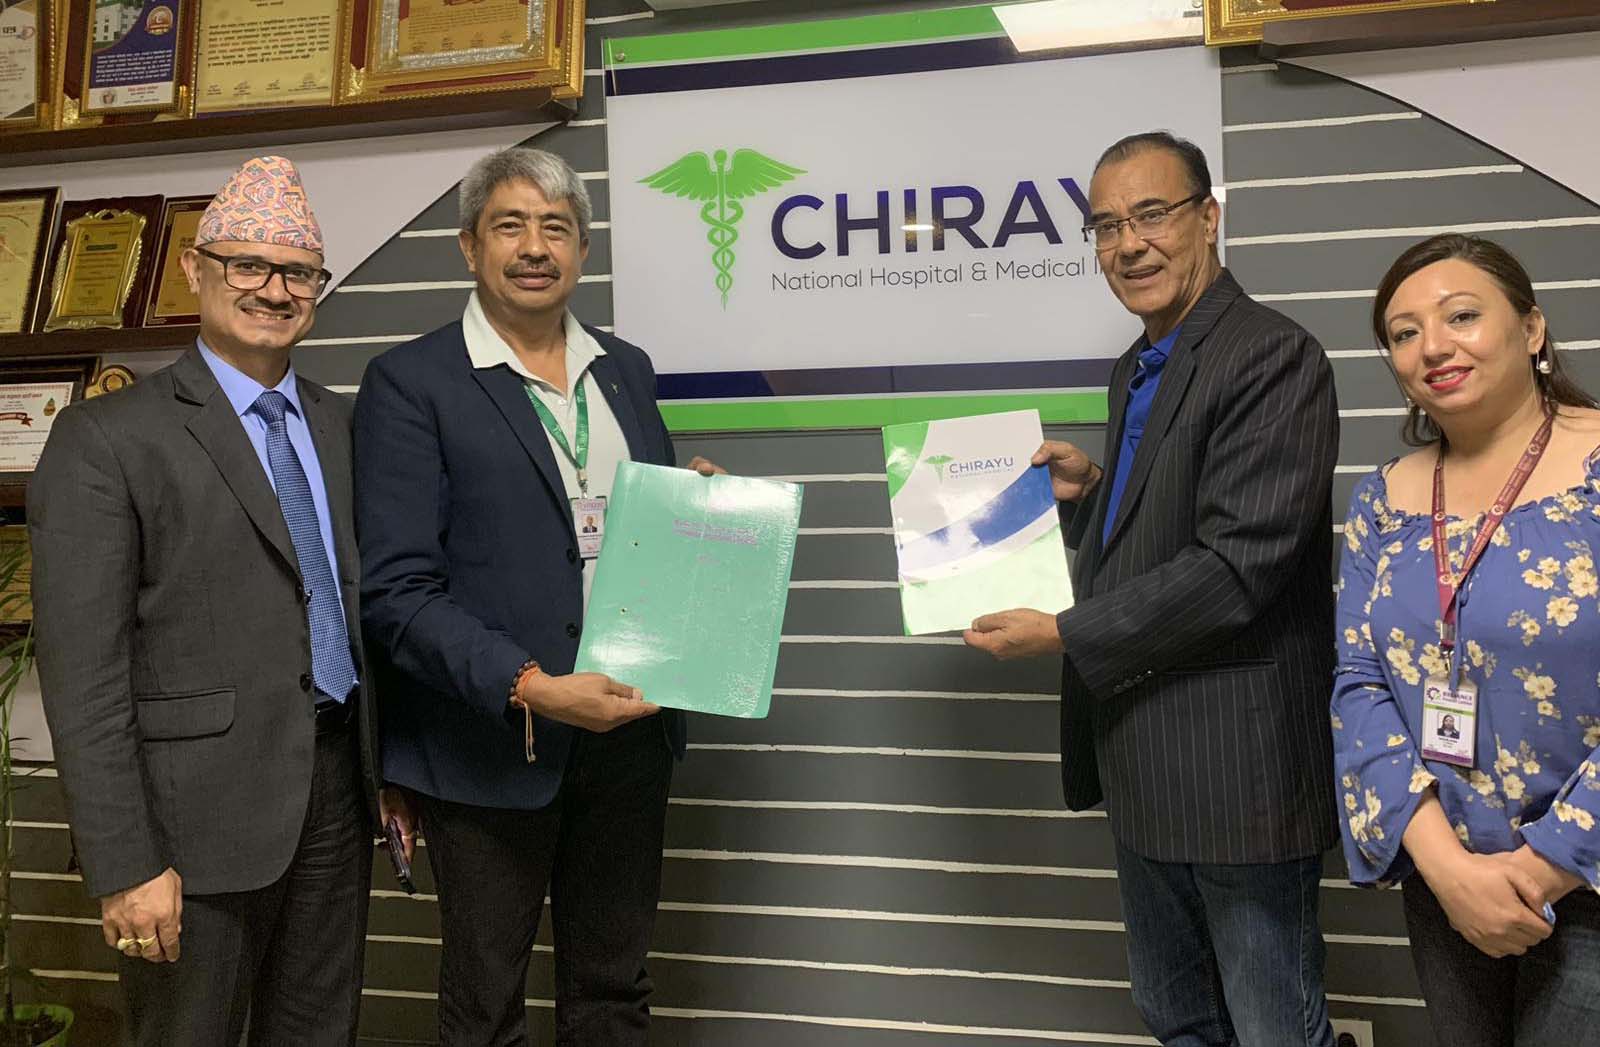 Agreement Signed between Reliance Finance Limited and Chirayau National Hospital